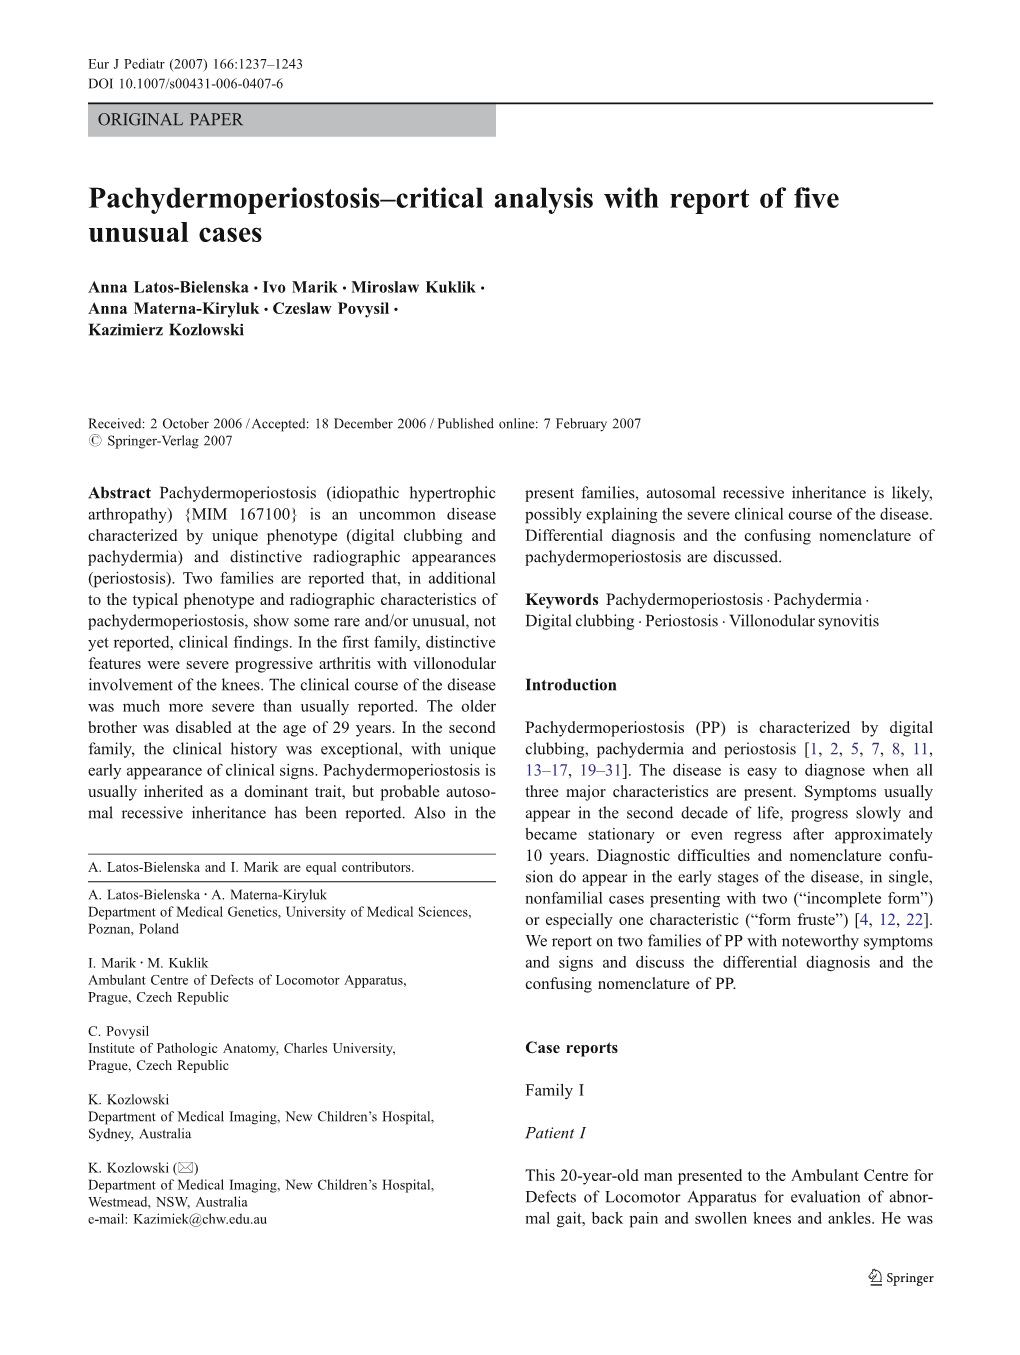 Pachydermoperiostosis–Critical Analysis with Report of Five Unusual Cases